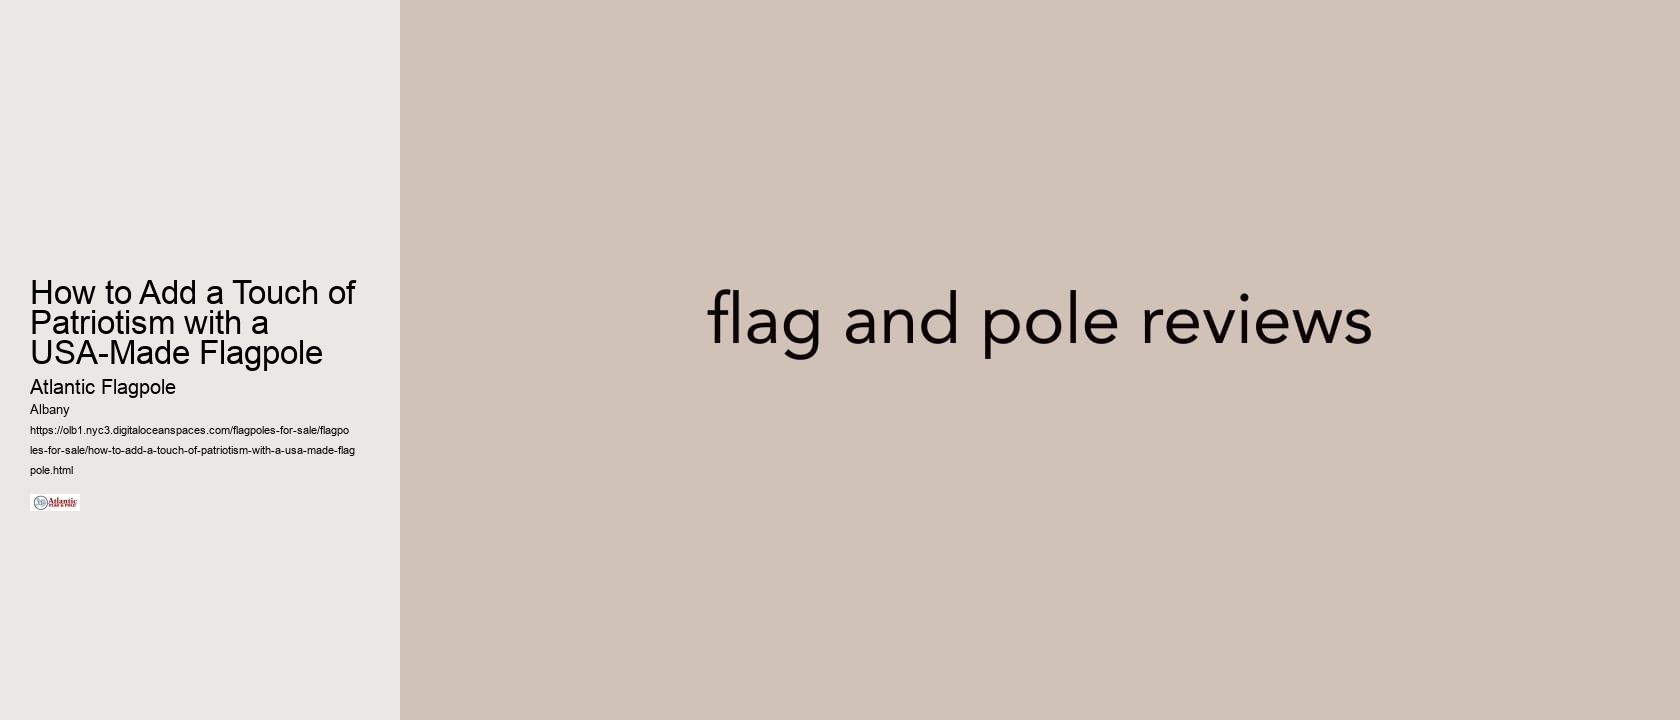 How to Add a Touch of Patriotism with a USA-Made Flagpole